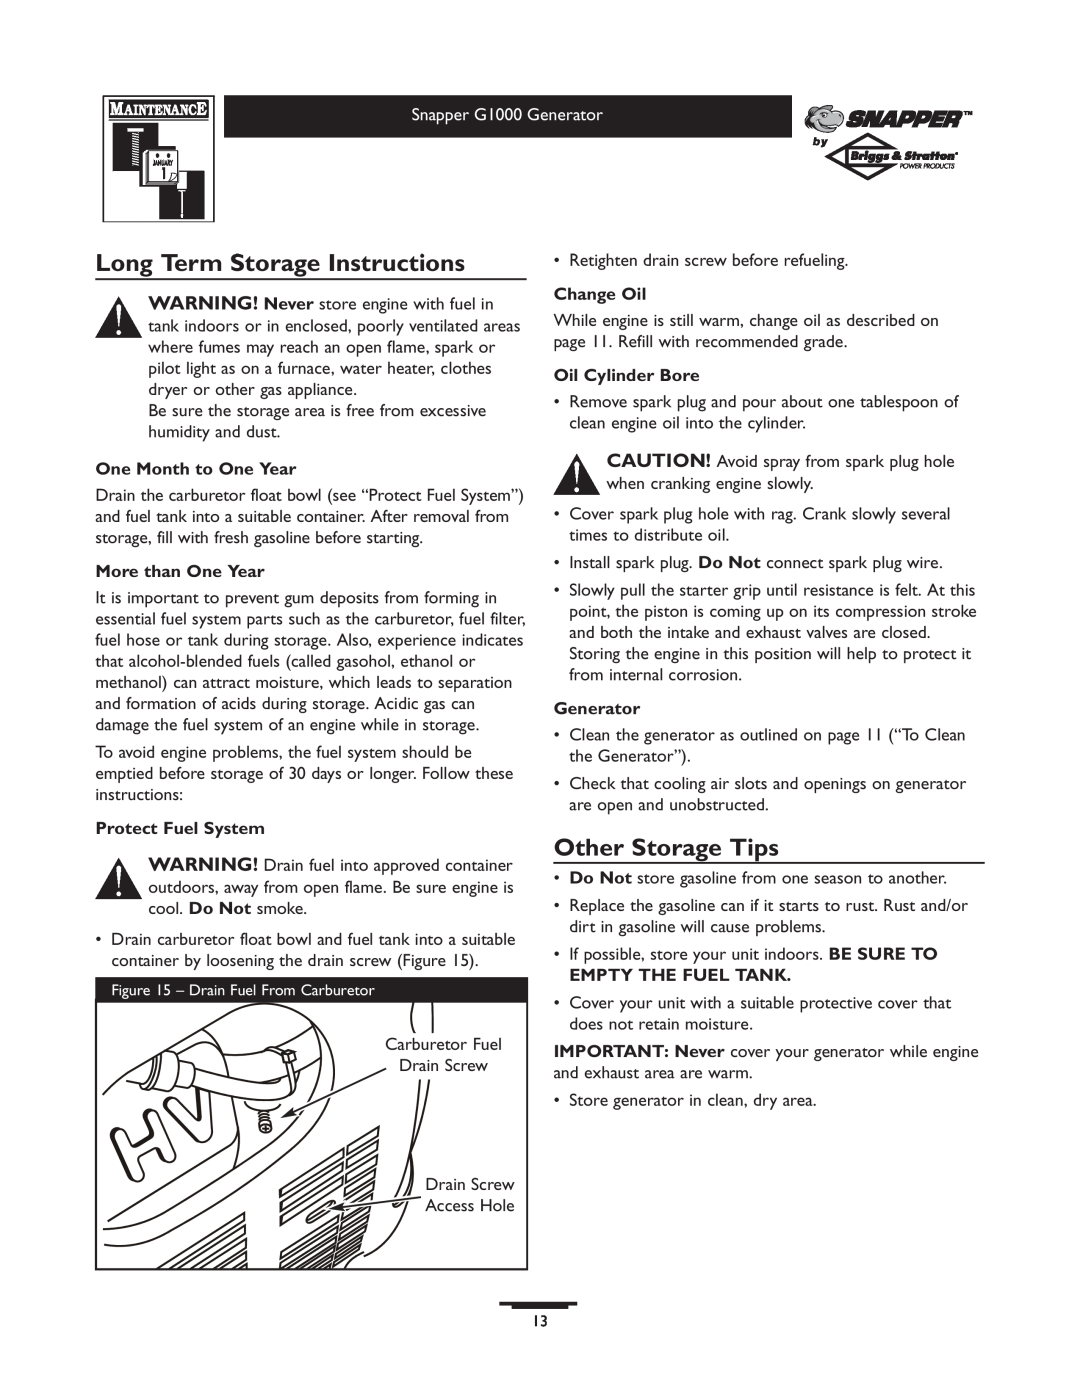 Snapper 1666-0 Long Term Storage Instructions, Other Storage Tips, One Month to One Year, More than One Year, Change Oil 